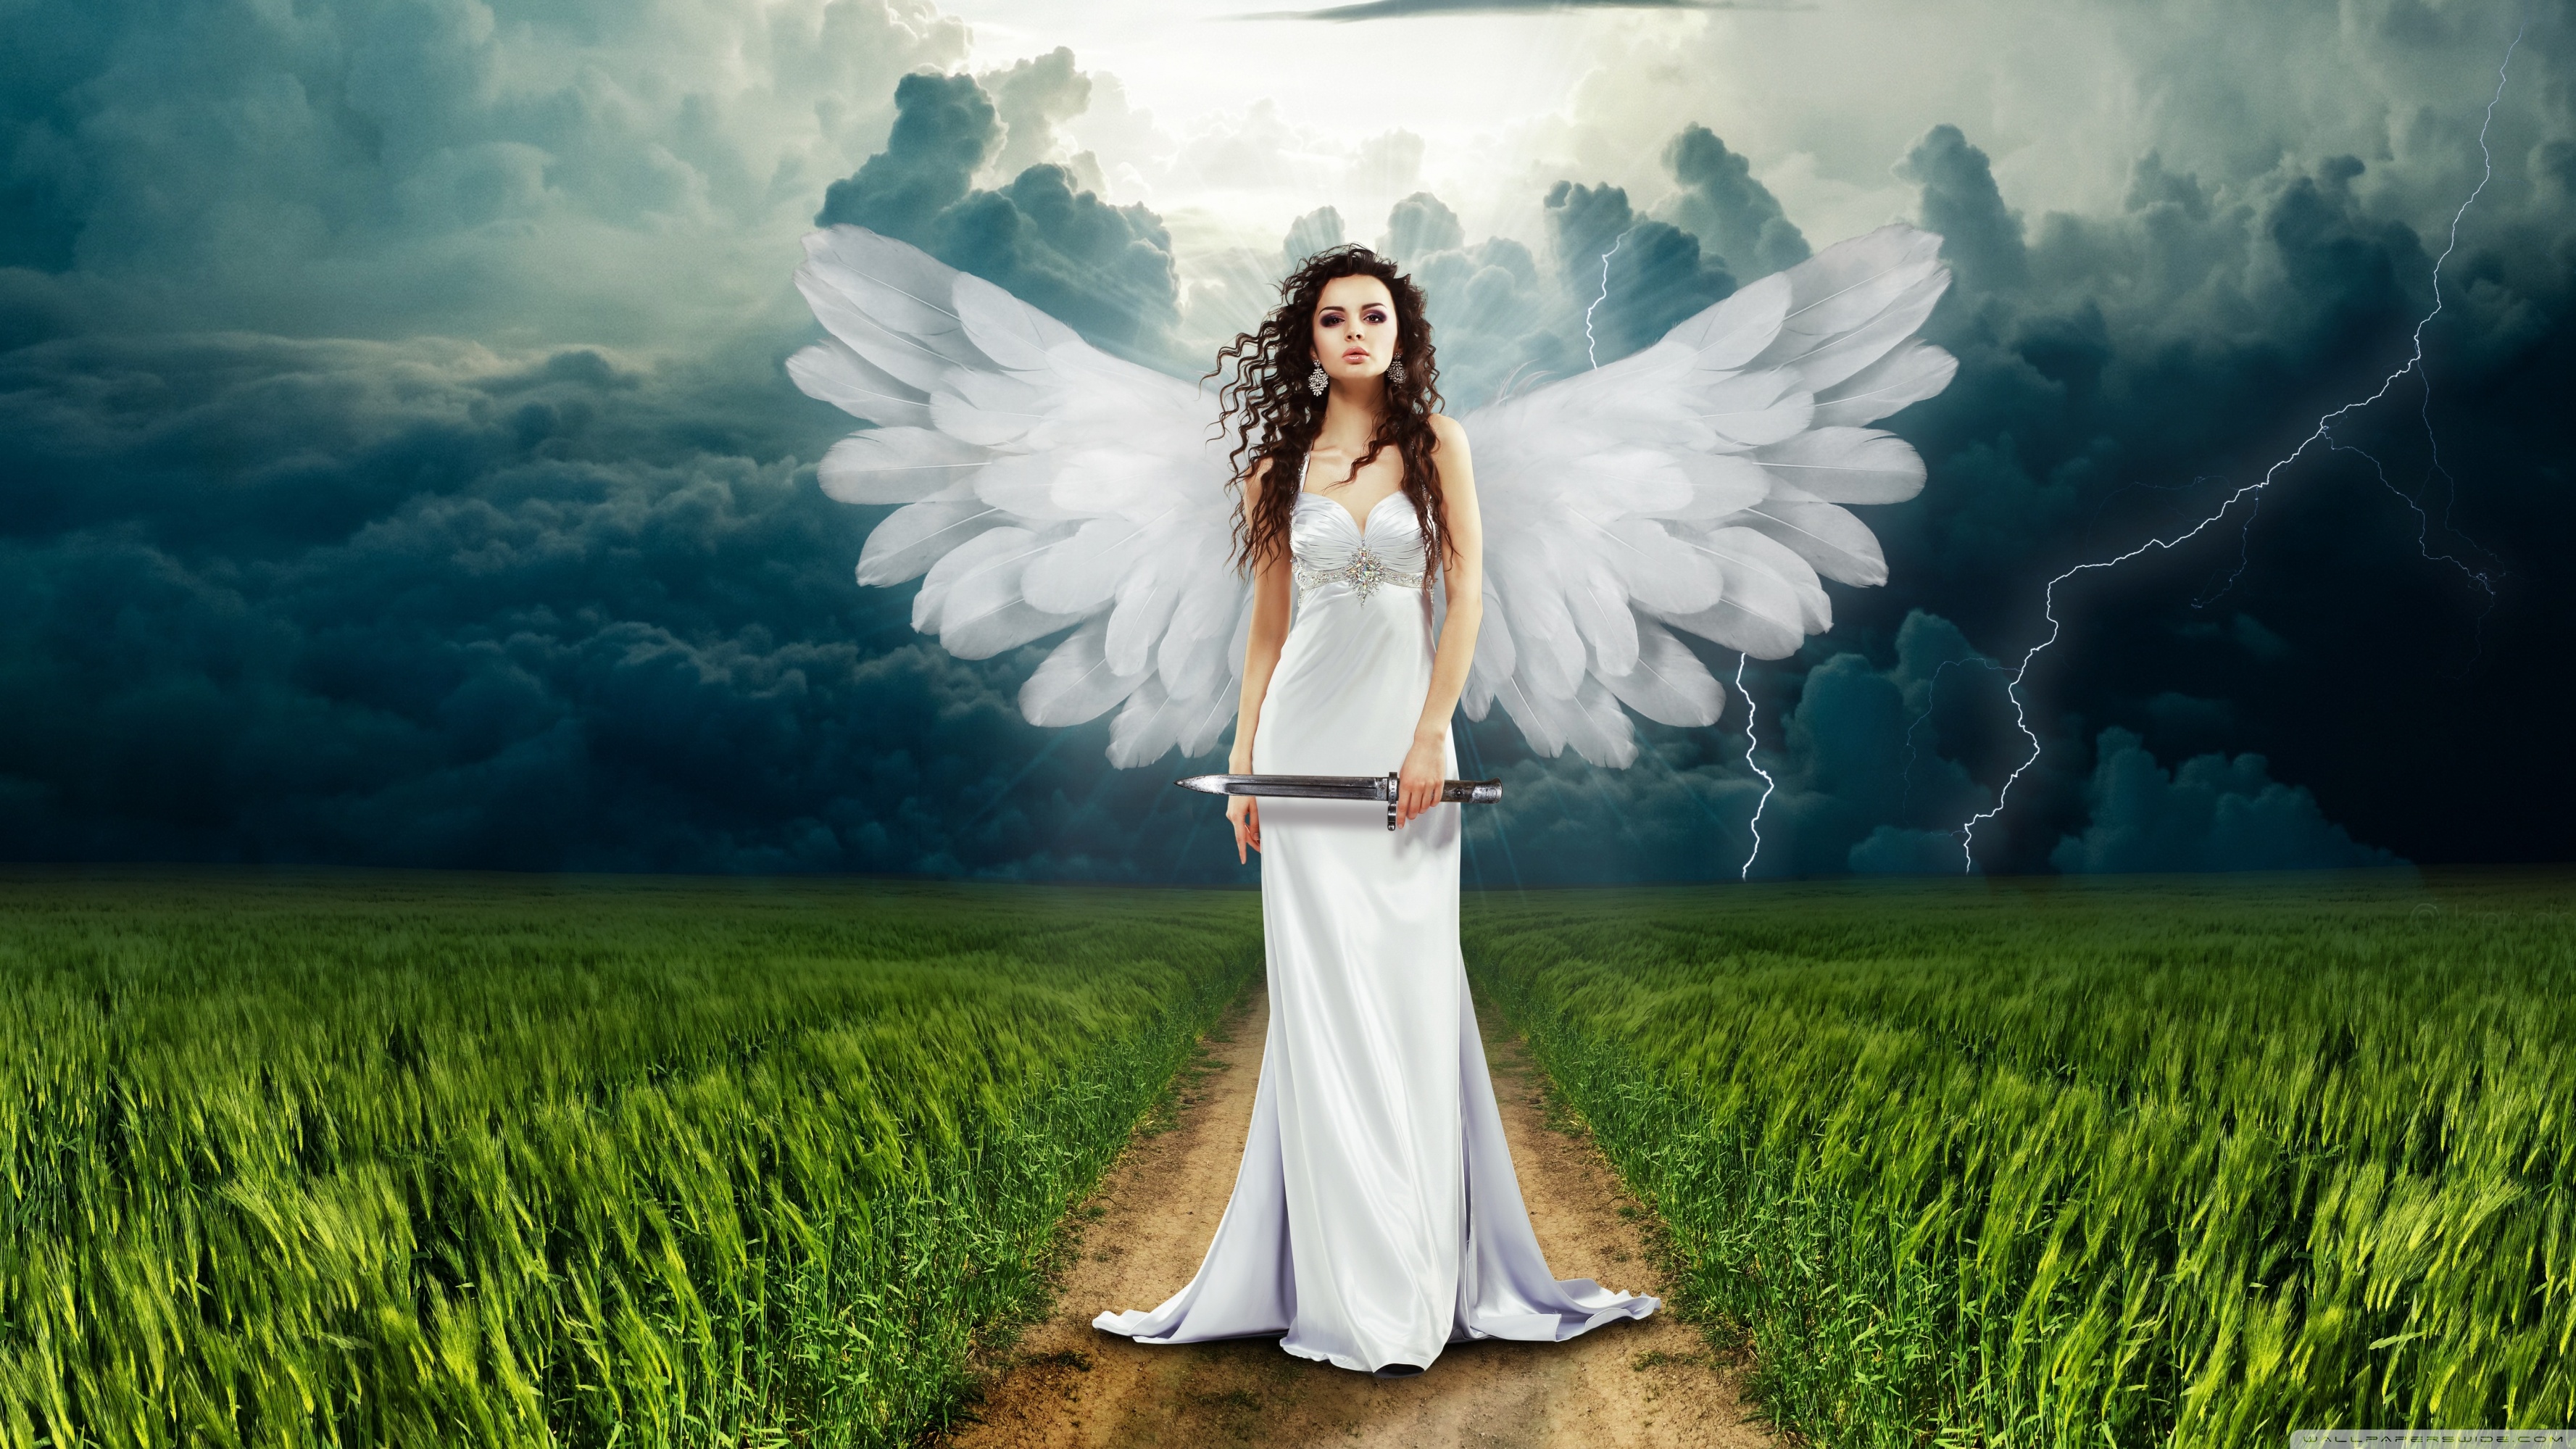 hd wallpapers for android mobile full screen,people in nature,angel,sky,fictional character,supernatural creature